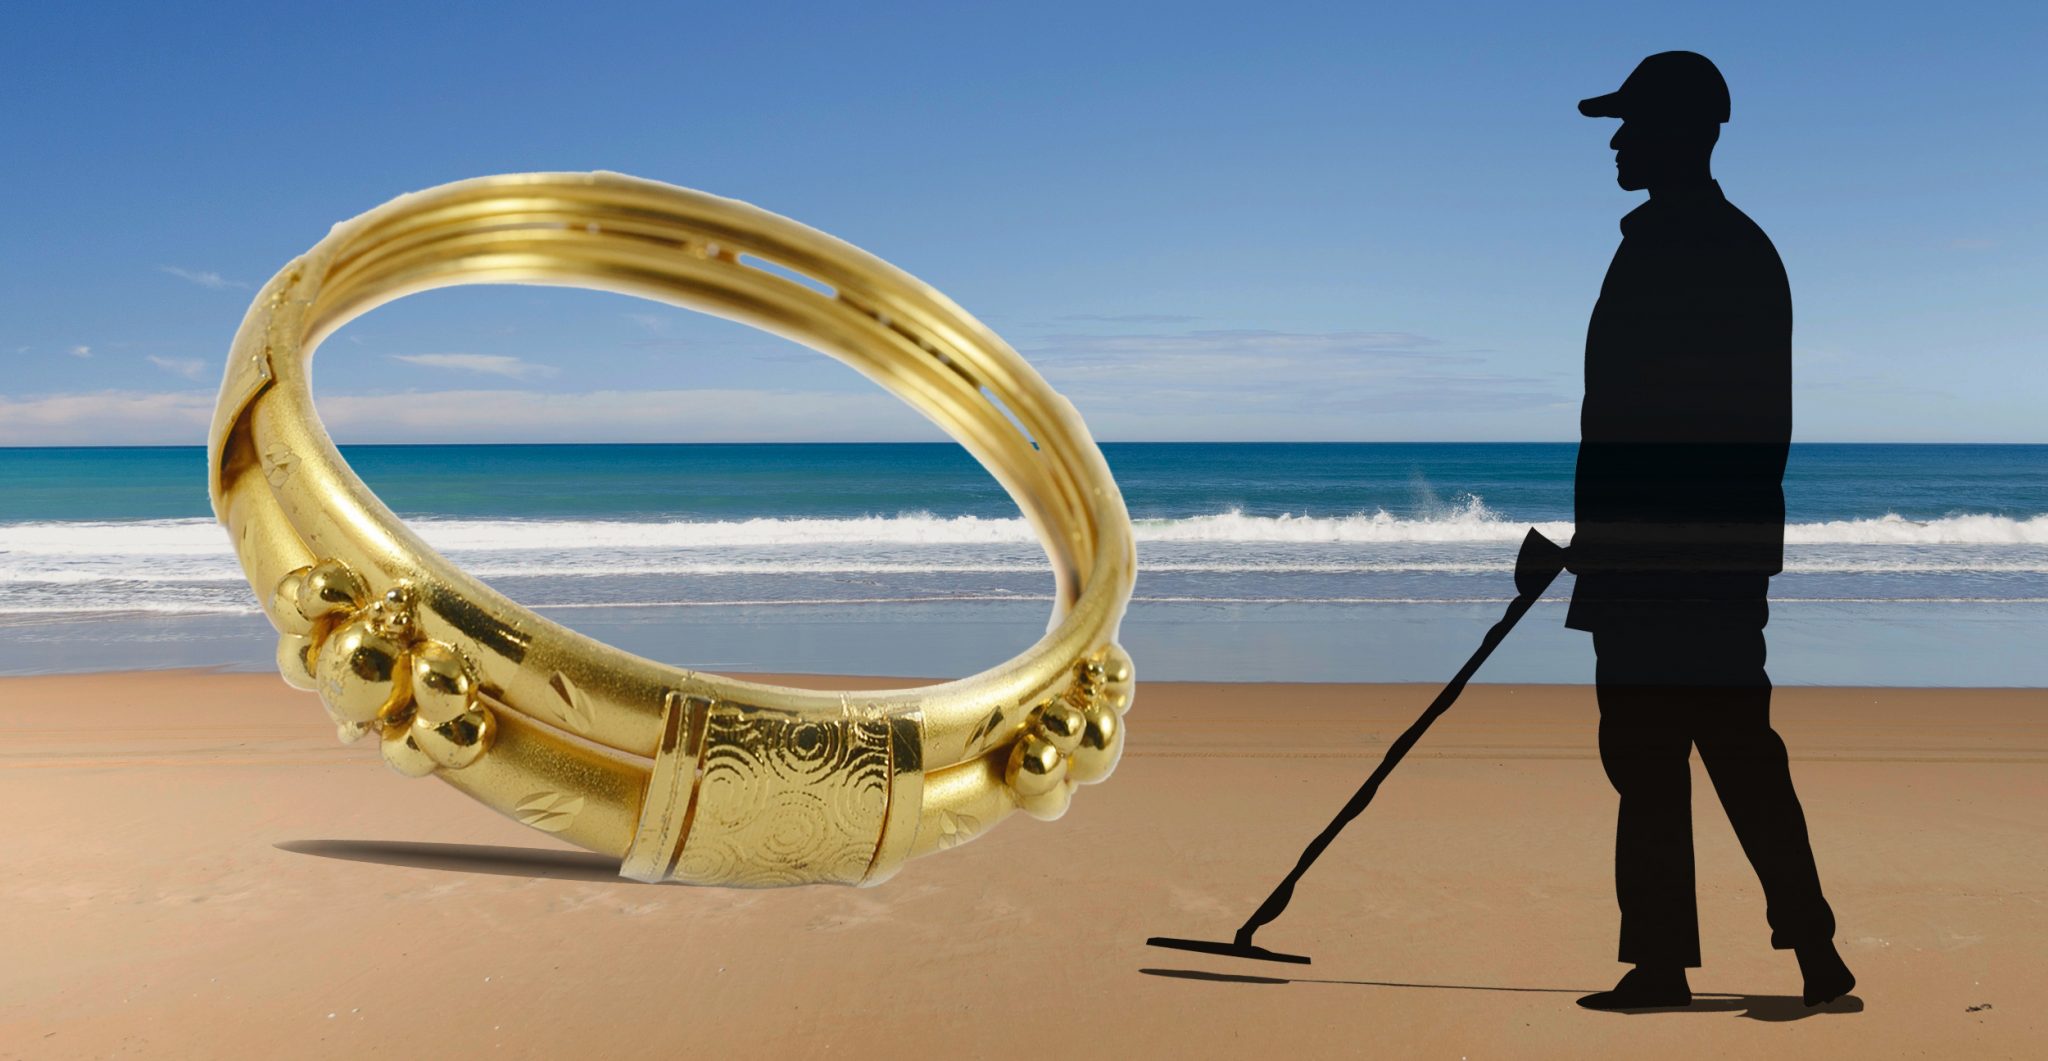 Gold ring and a metal detectorist